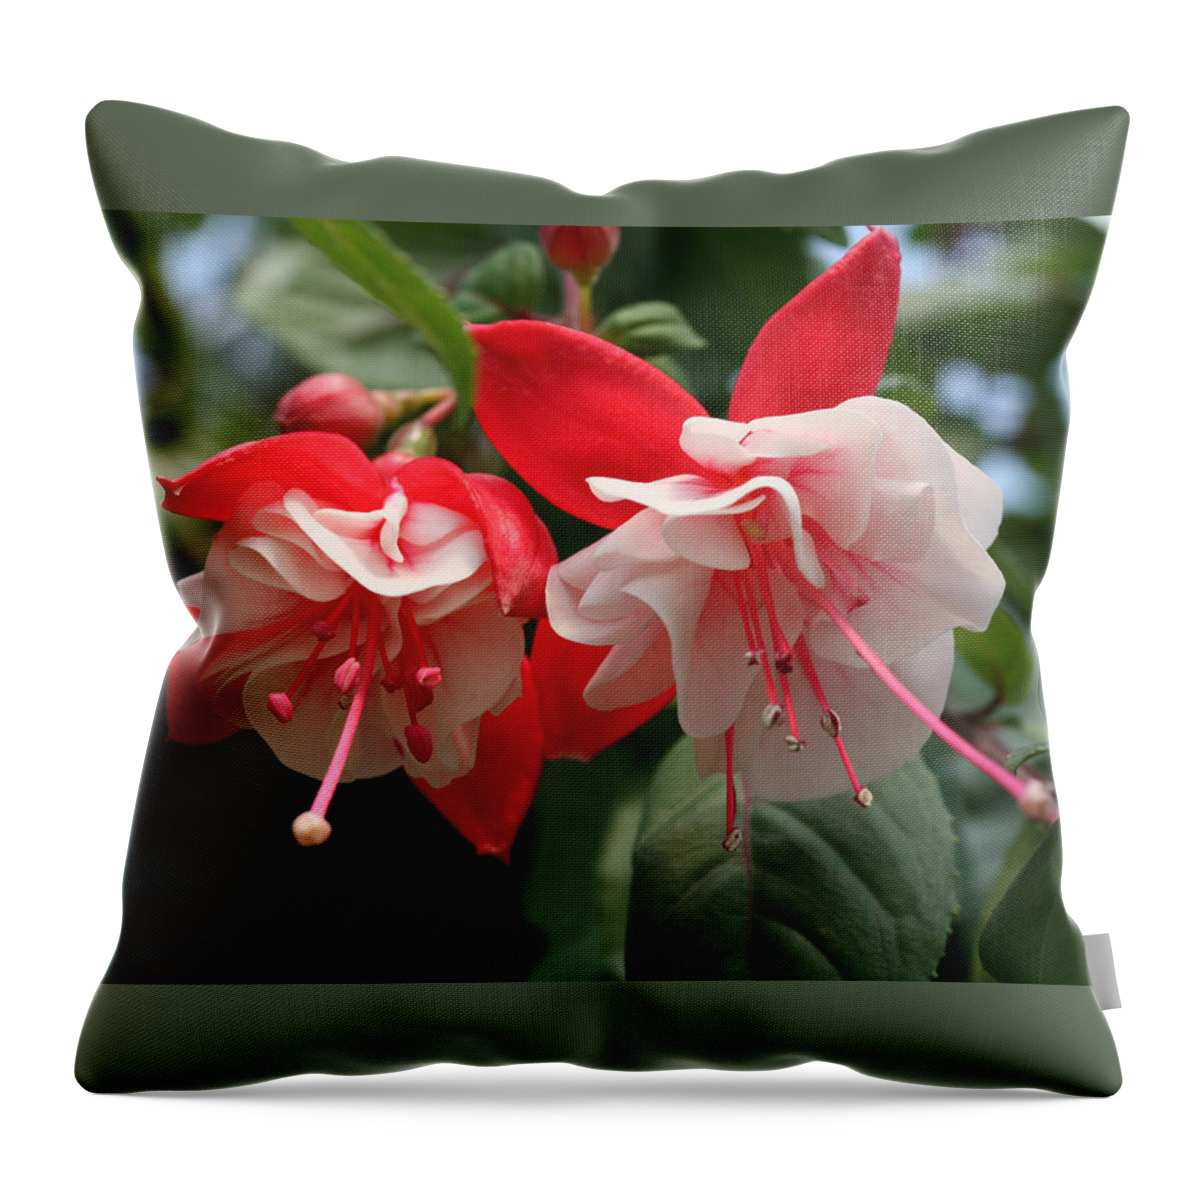  Throw Pillow featuring the photograph Candy Cane Fuchsias by Tammy Pool